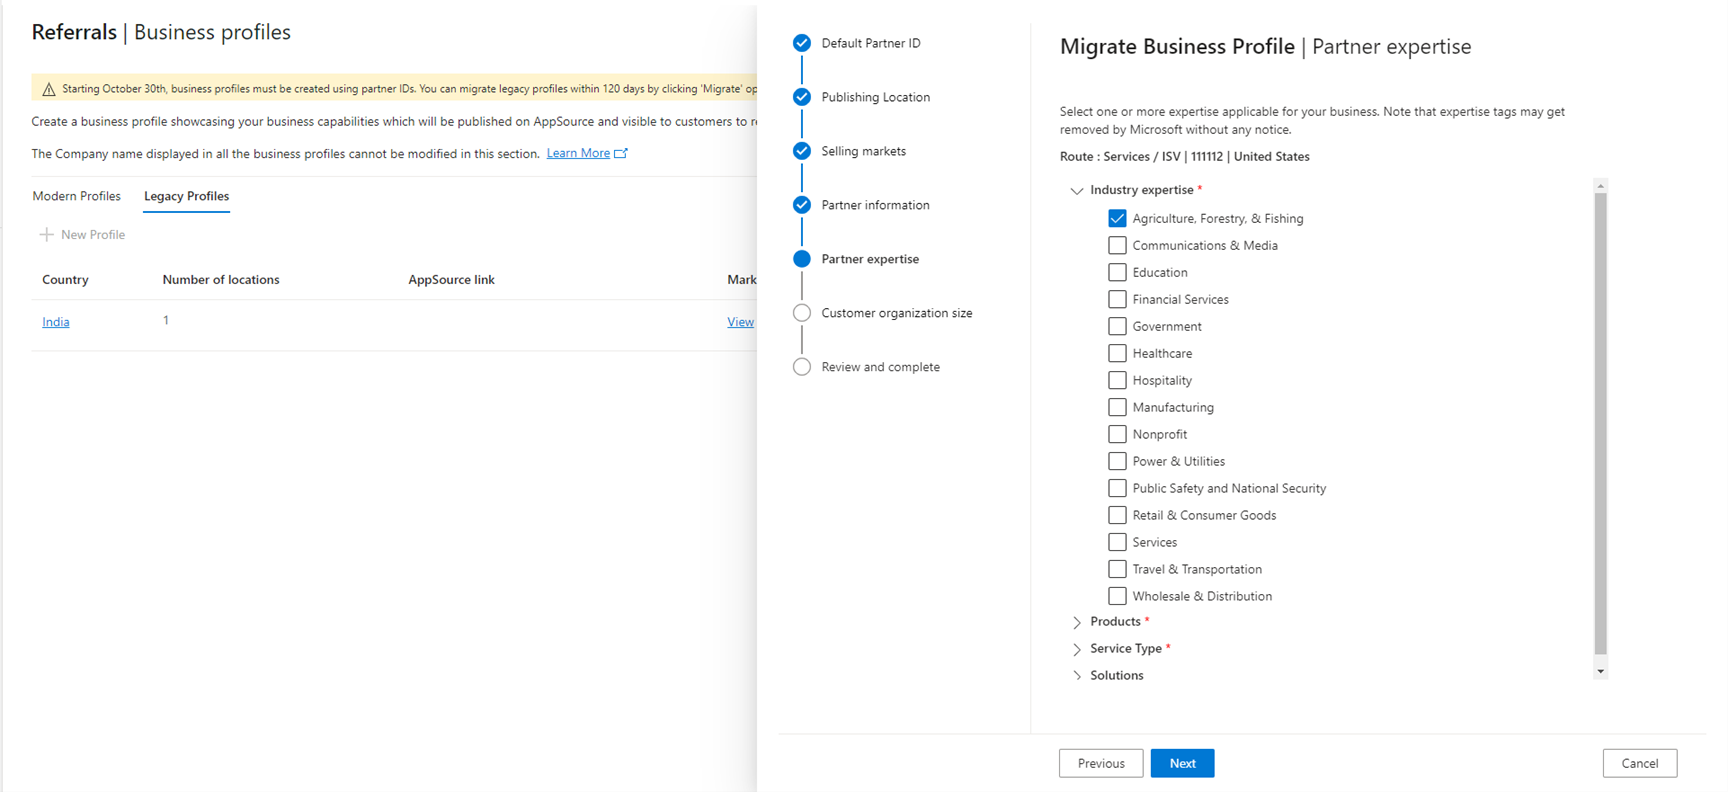 Screenshot of the referrals business page with migration partner expertise.